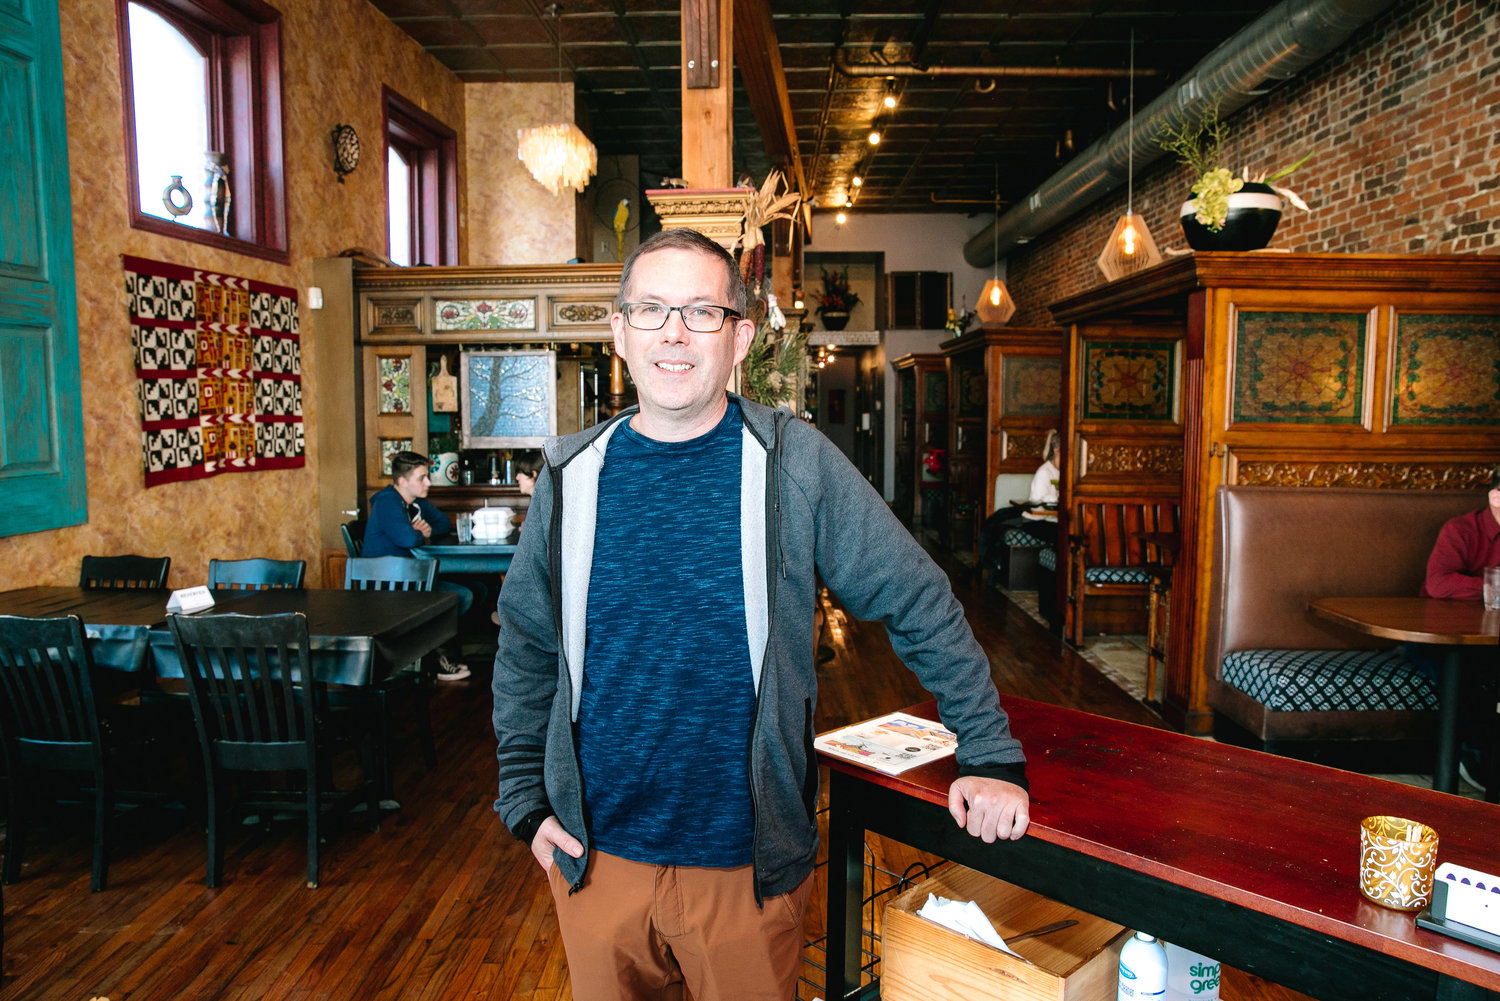 With three entities on Commercial Street, Joe Gidman closely monitors consumer trends in small business.